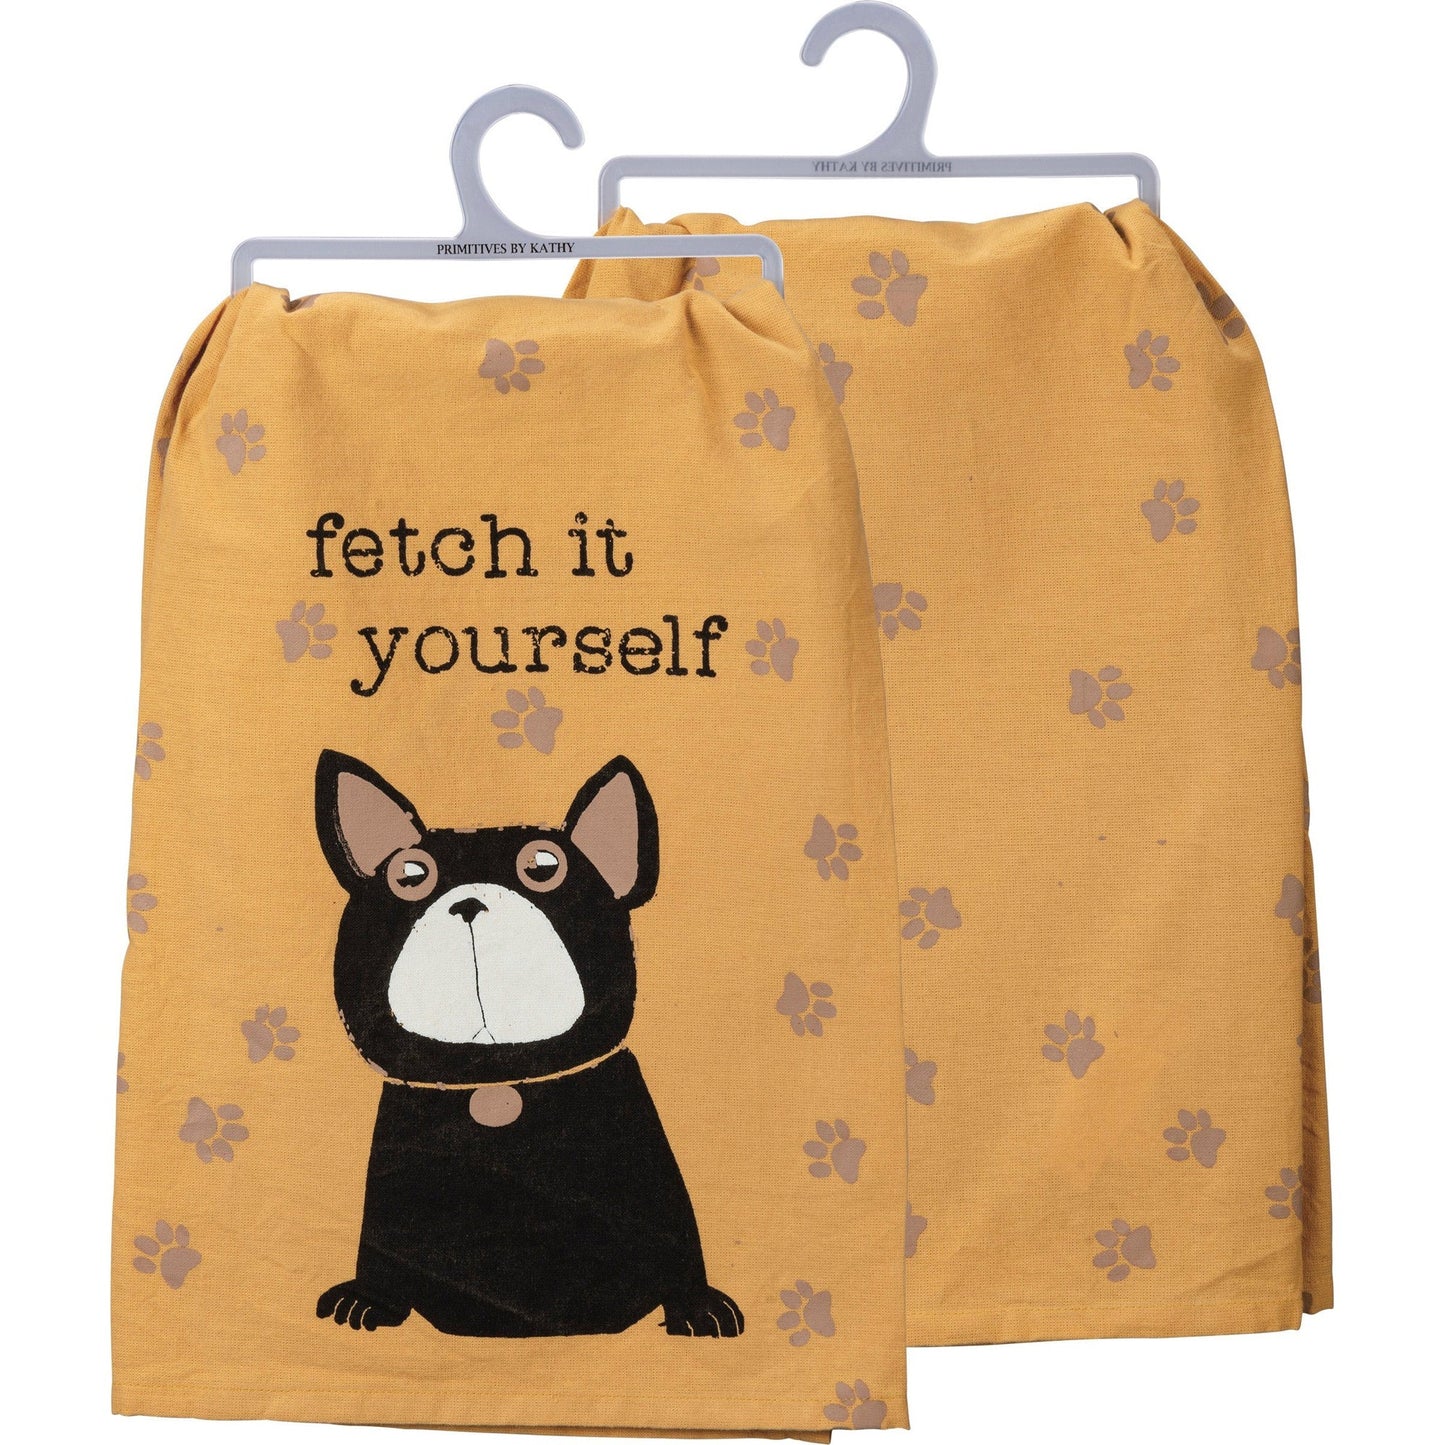 Fetch It Yourself Dish Cloth Towel | Novelty Silly Tea Towels | Cute Kitchen Hand Towel | Pets, Dogs, Paw Print | 28" Square